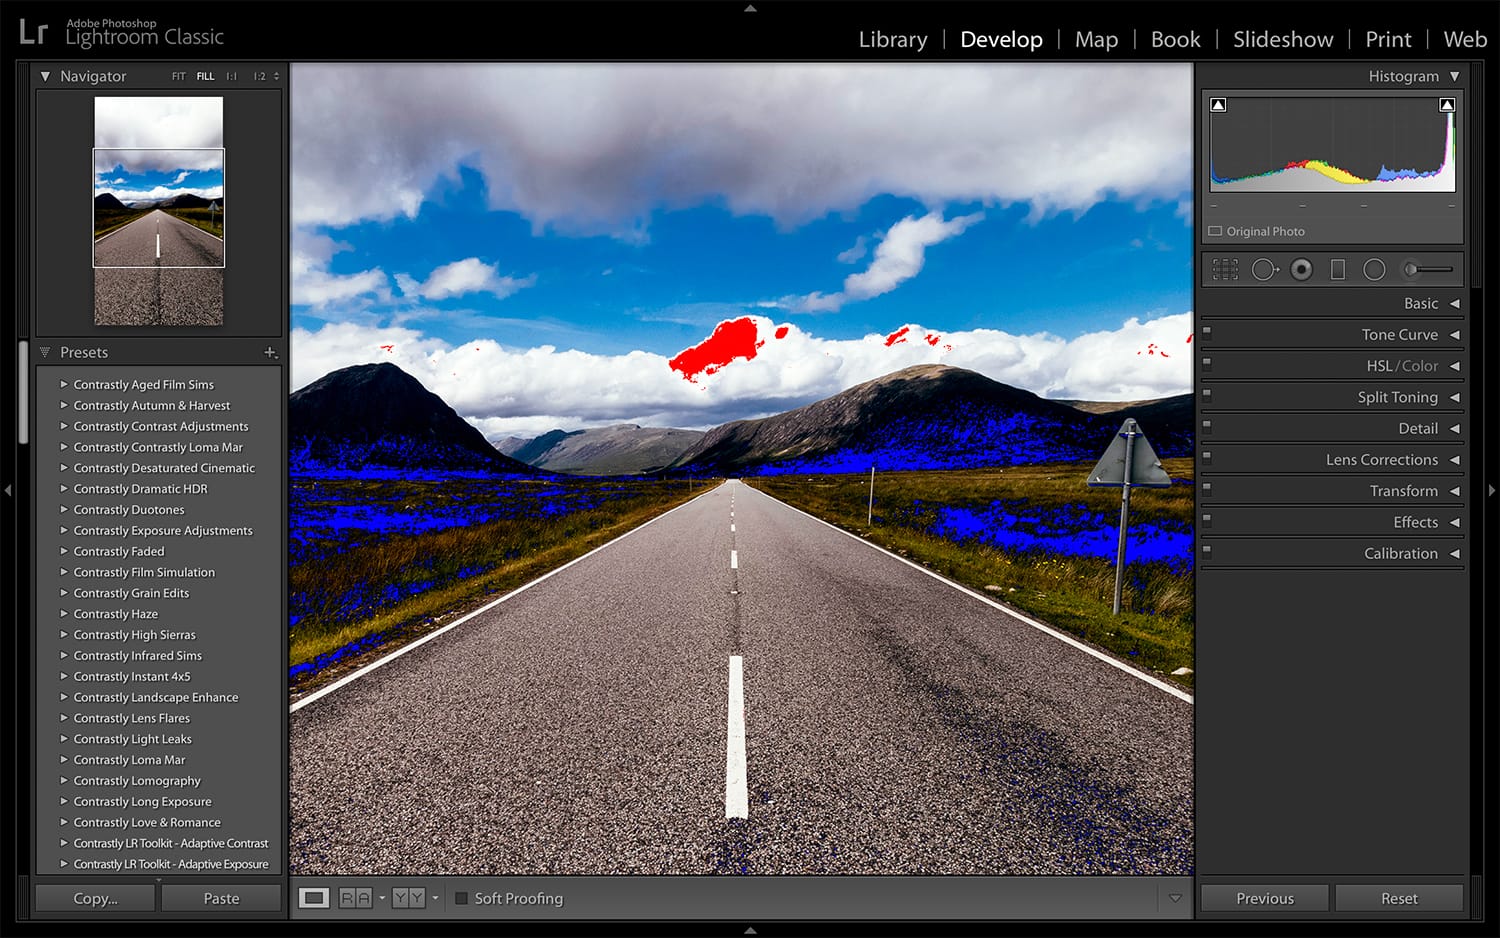 Check for Clipping - Lightroom Classic Histogram